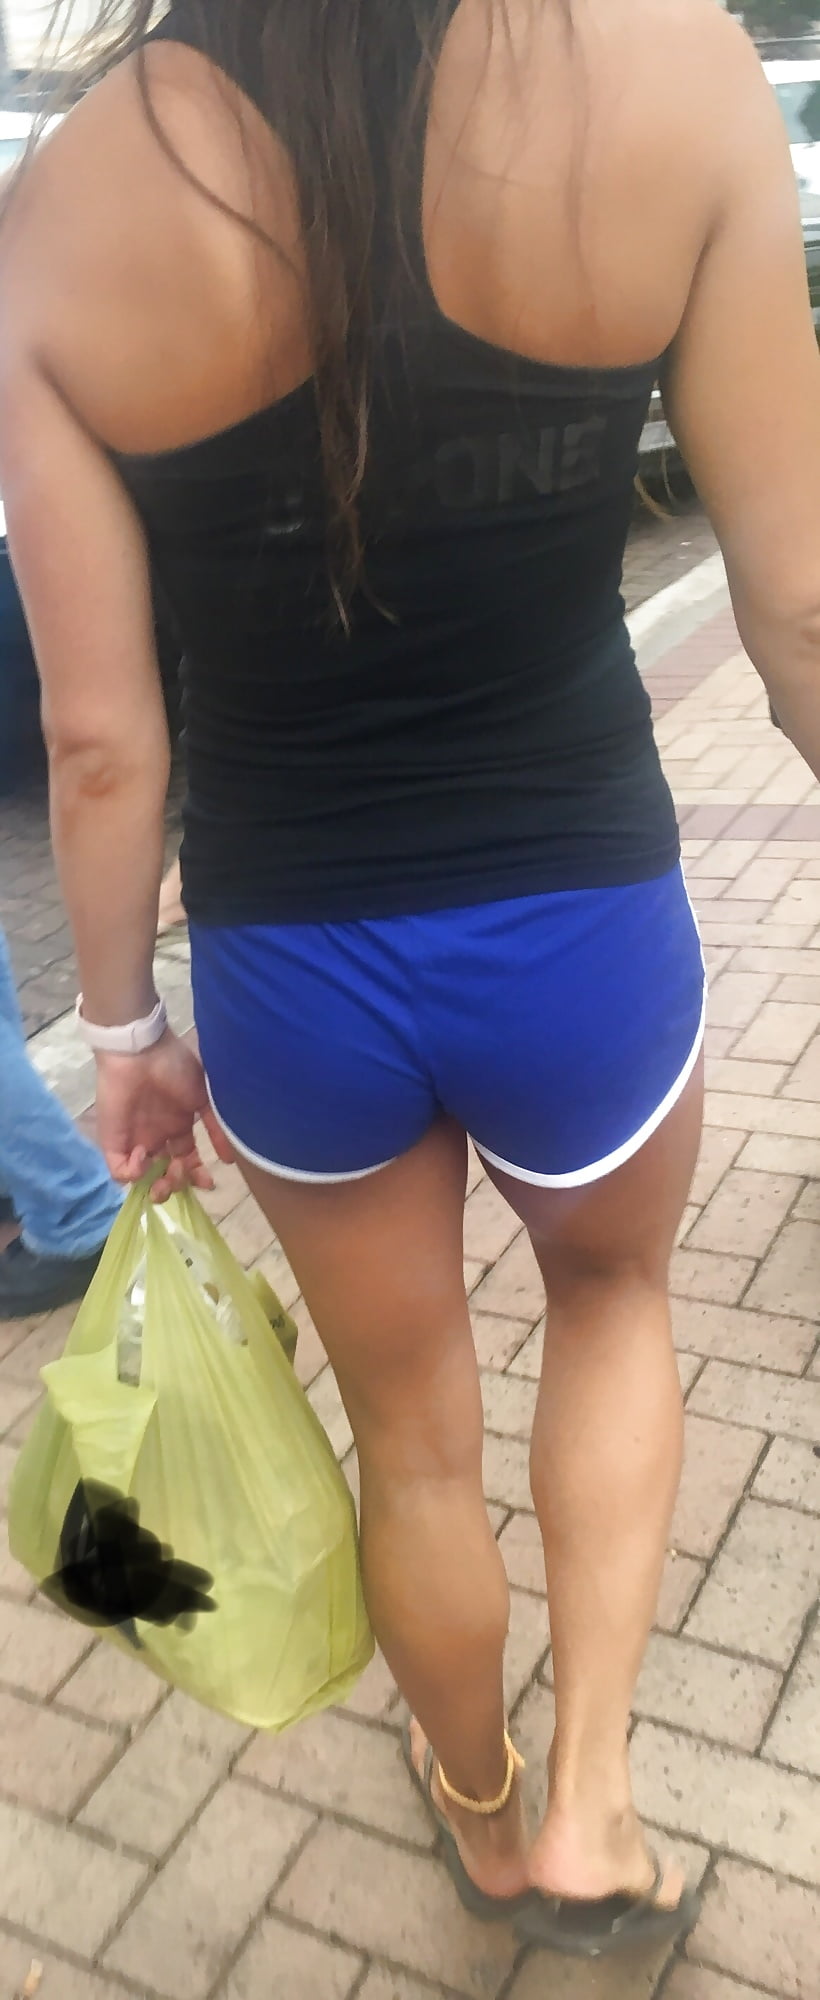 Tight tanned teen in tiny shorts (8/13)